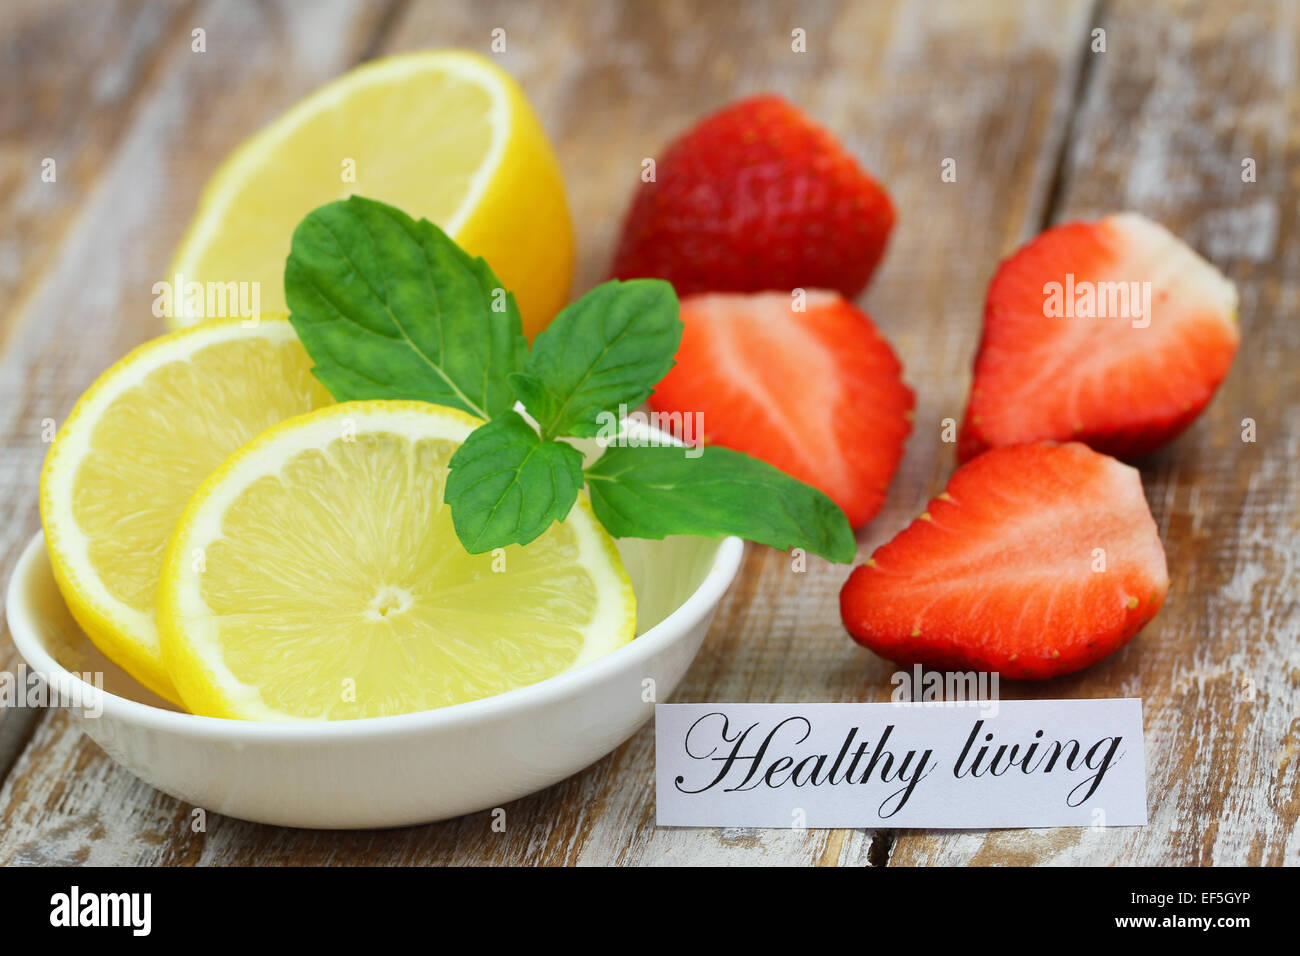 Healthy living card with lemon and strawberries Stock Photo